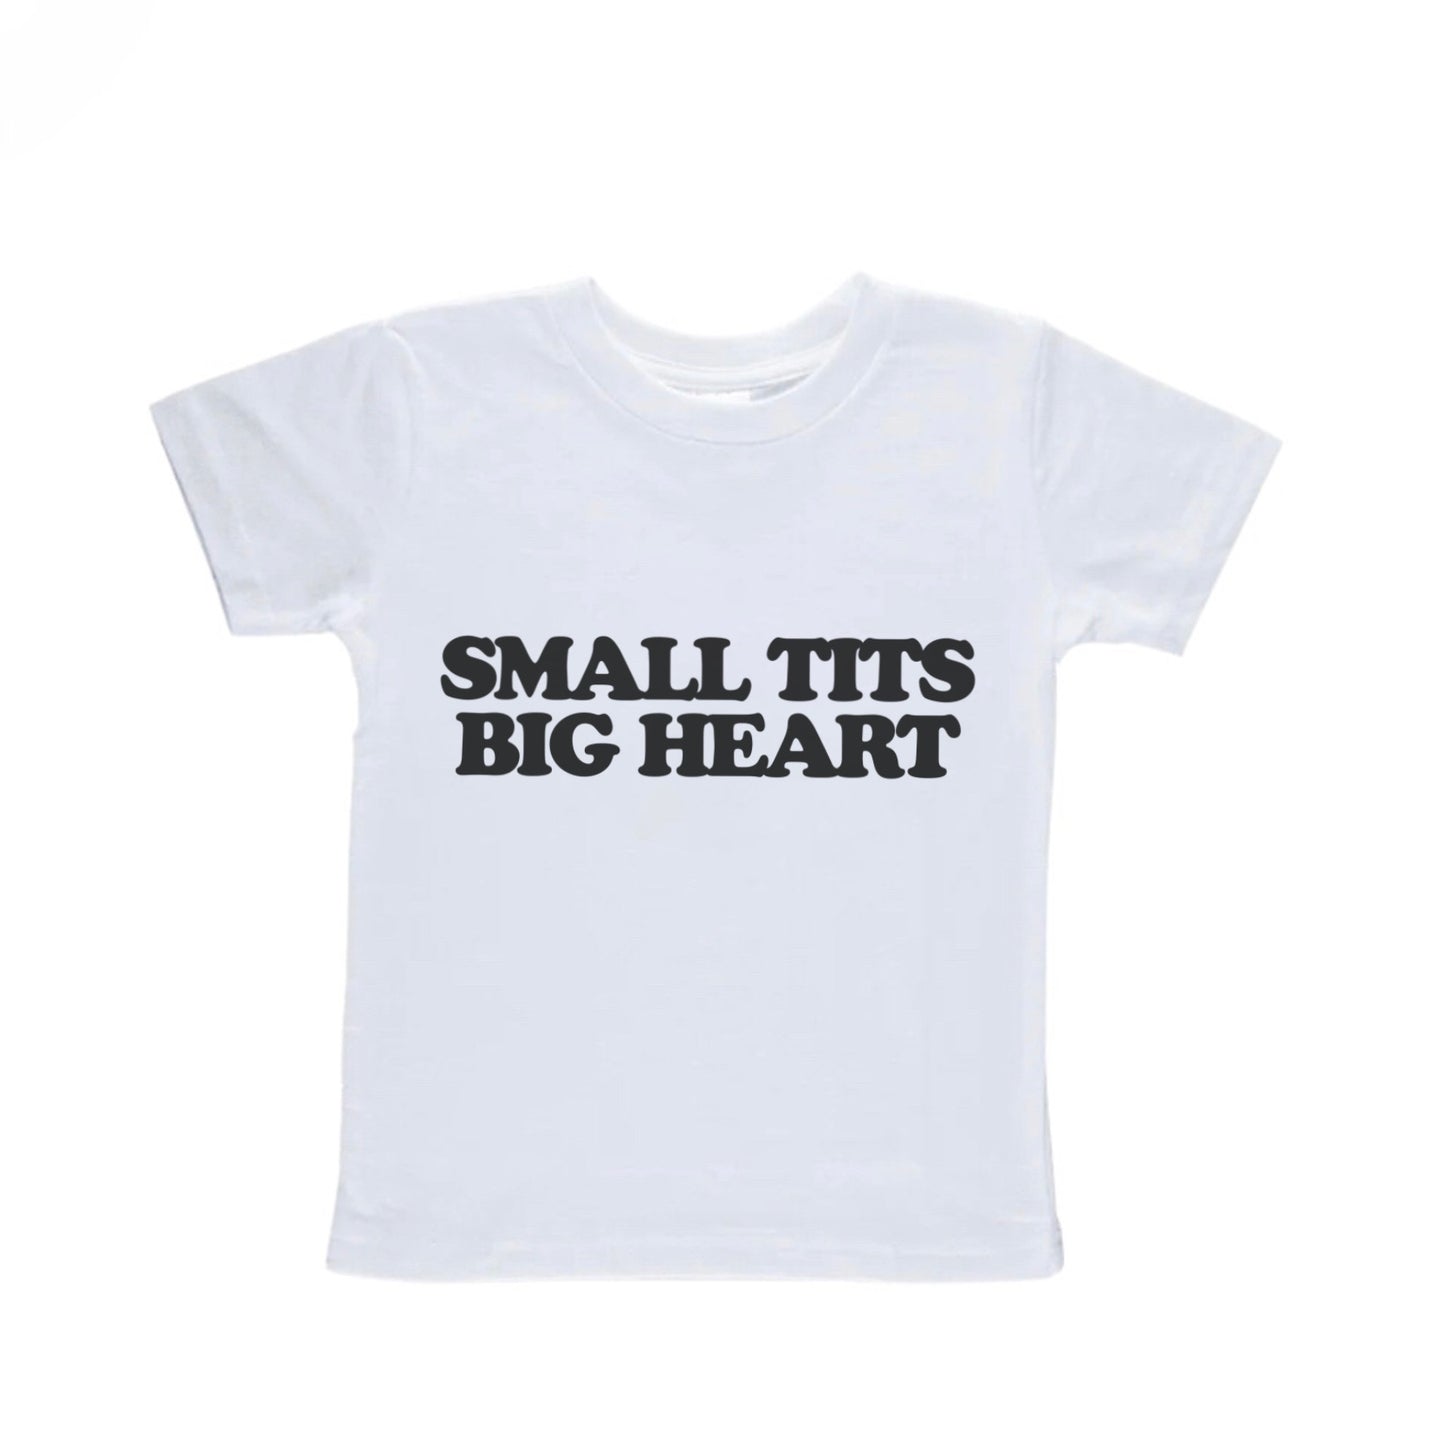 small tits big heart <3 baby tee – Hoes For Clothes